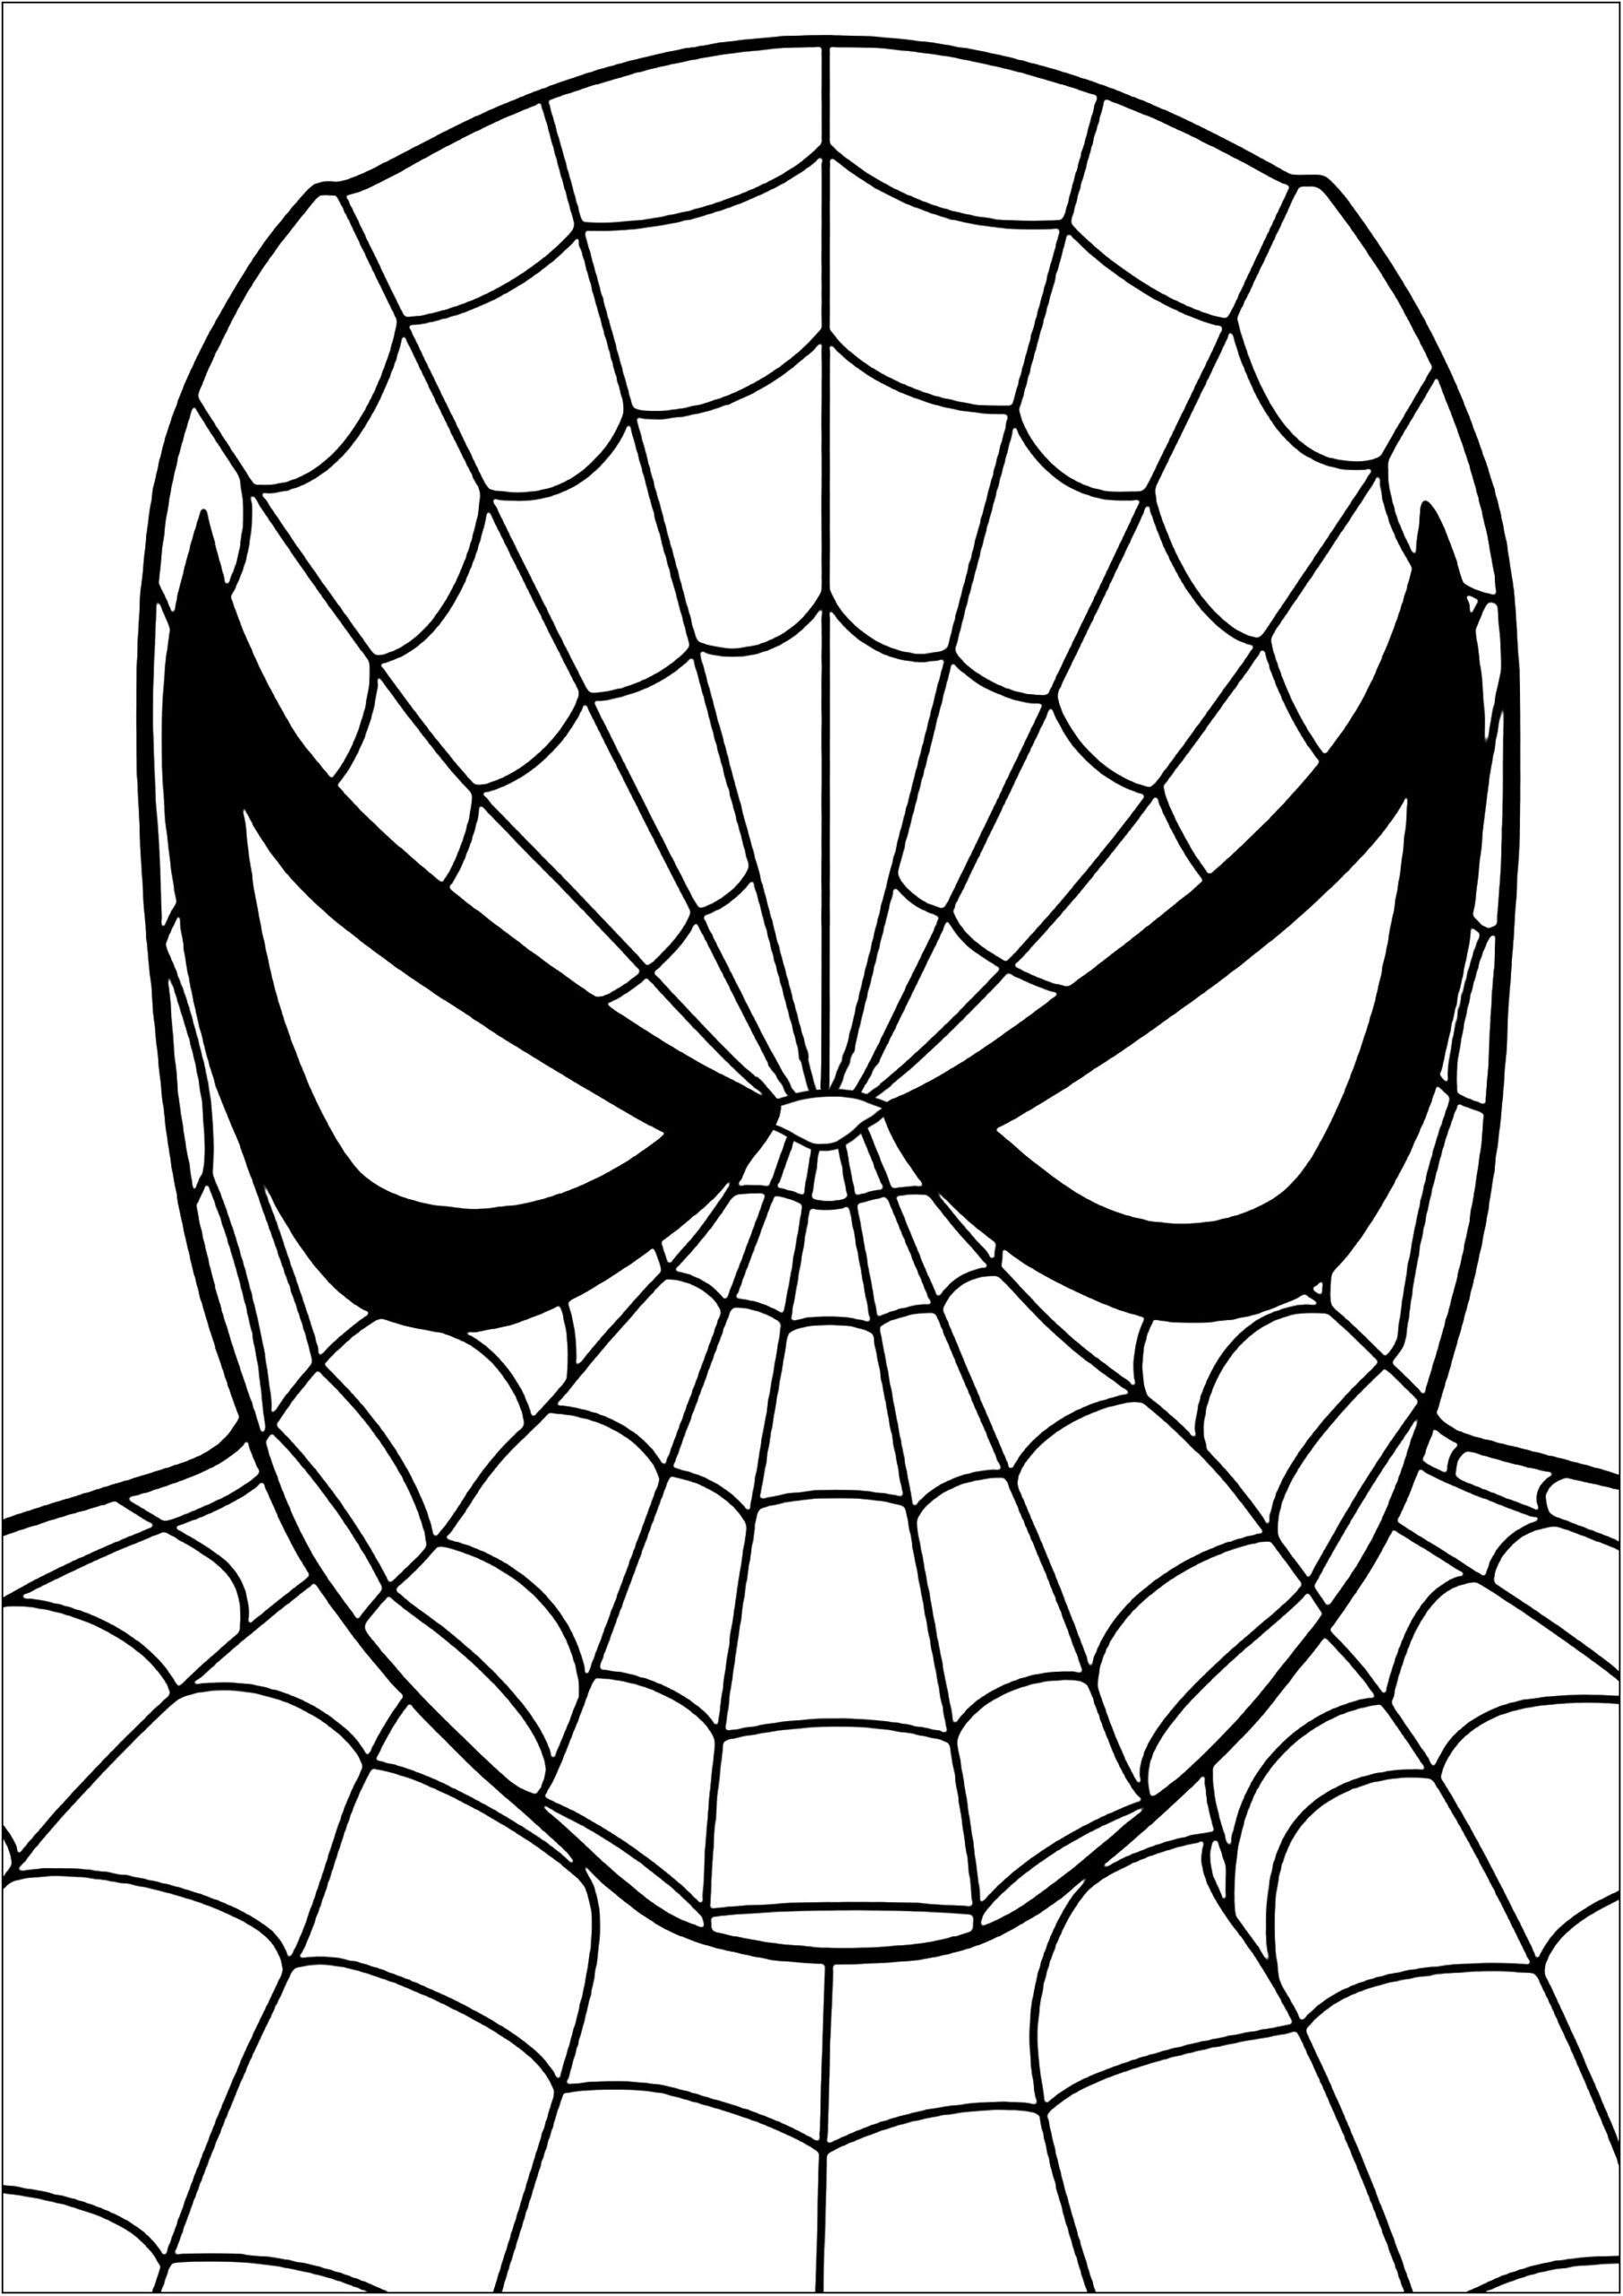 Coloring pages for children spiderman